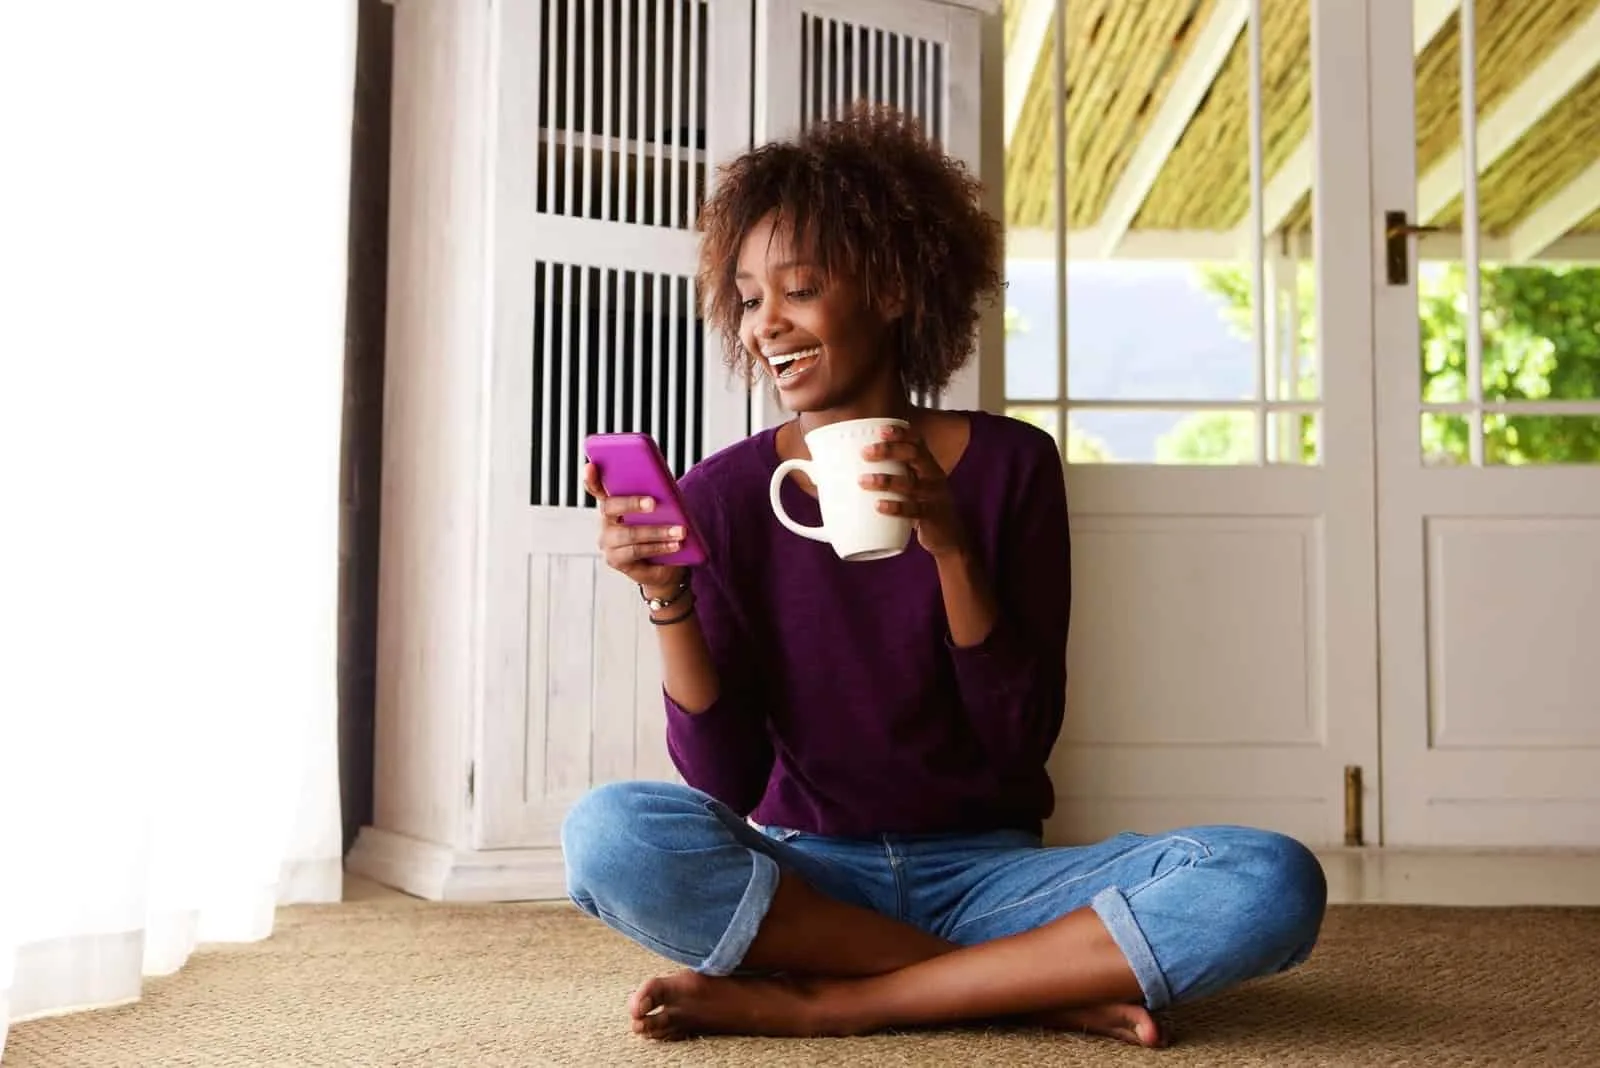 a smiling woman sitting on the floor drinking coffee and typing on the phone